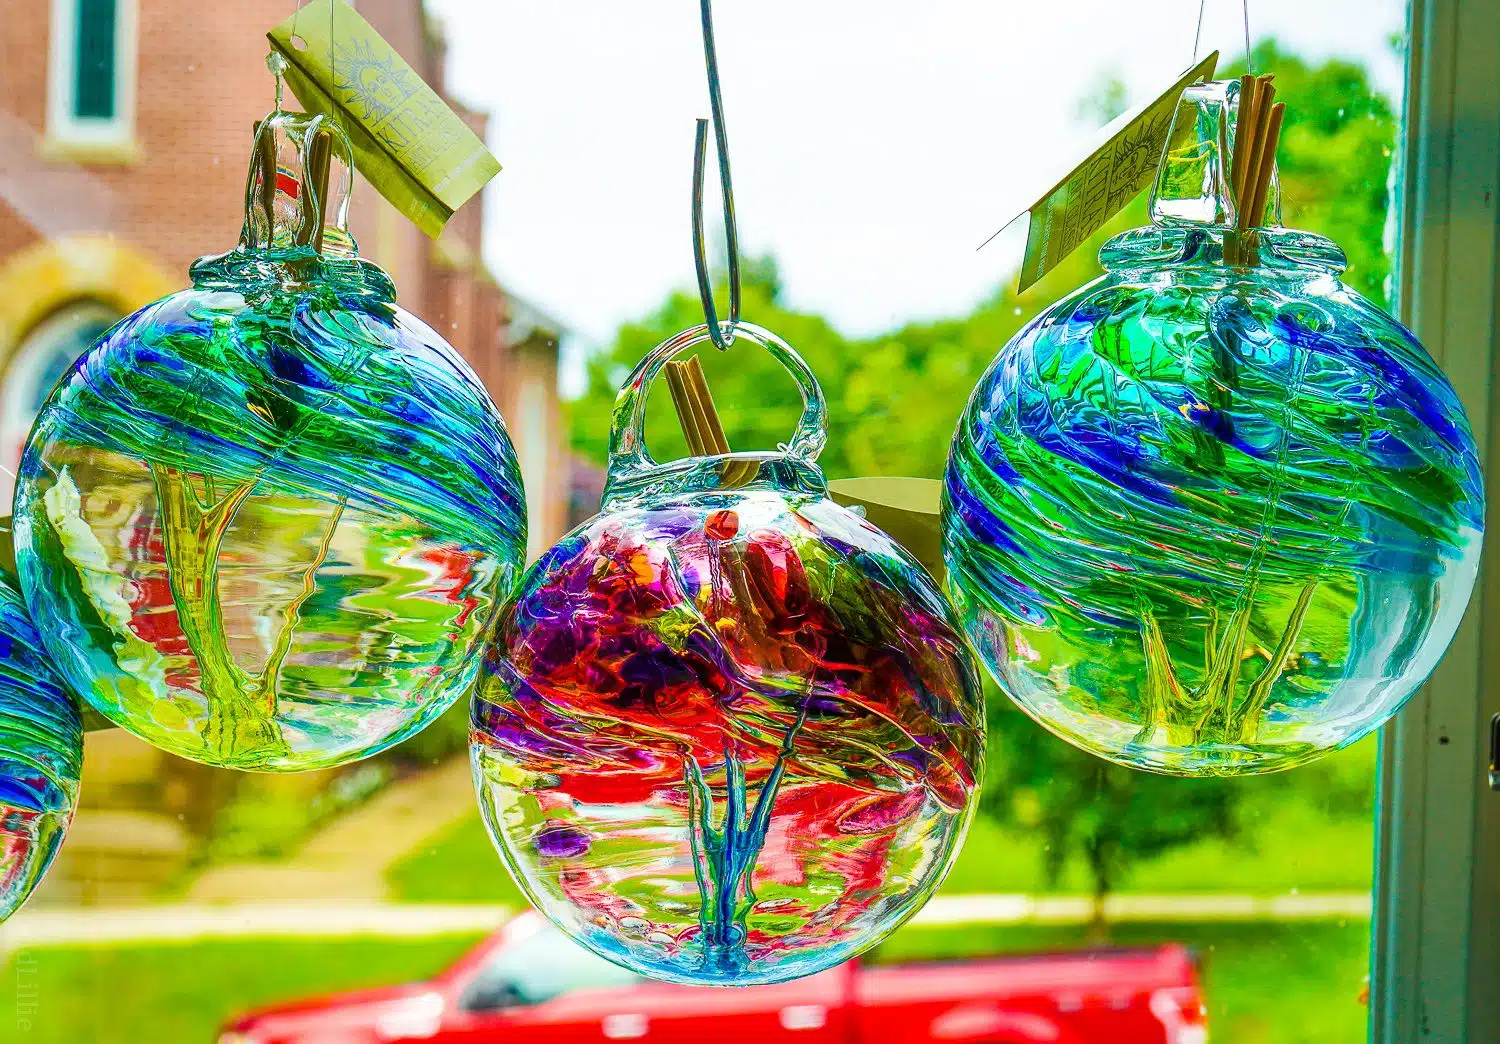 Glass ornaments by the window.